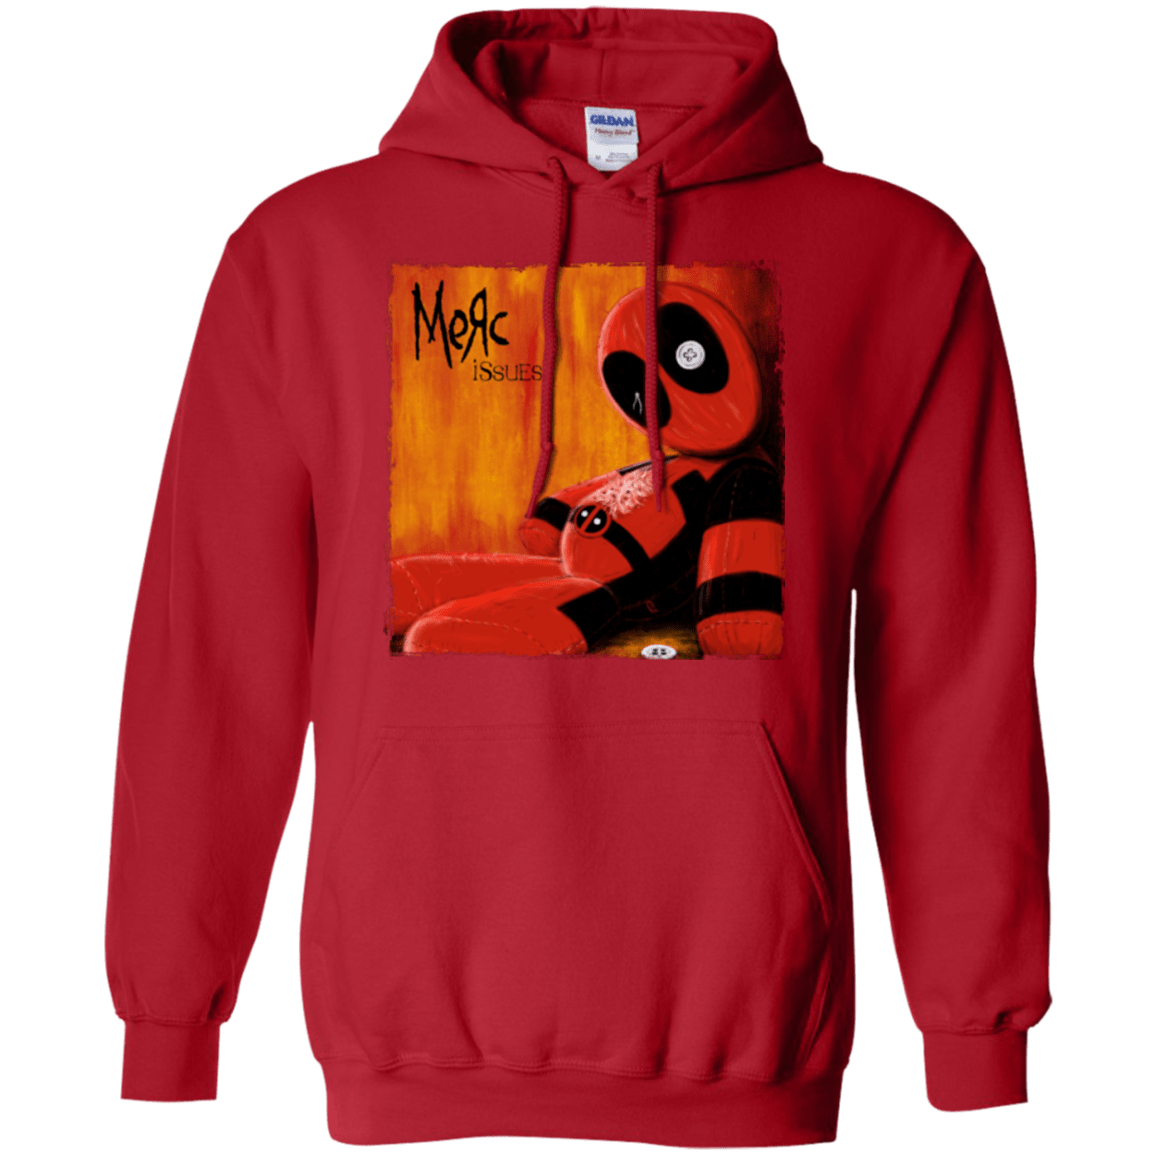 Sweatshirts Red / Small Issues Pullover Hoodie